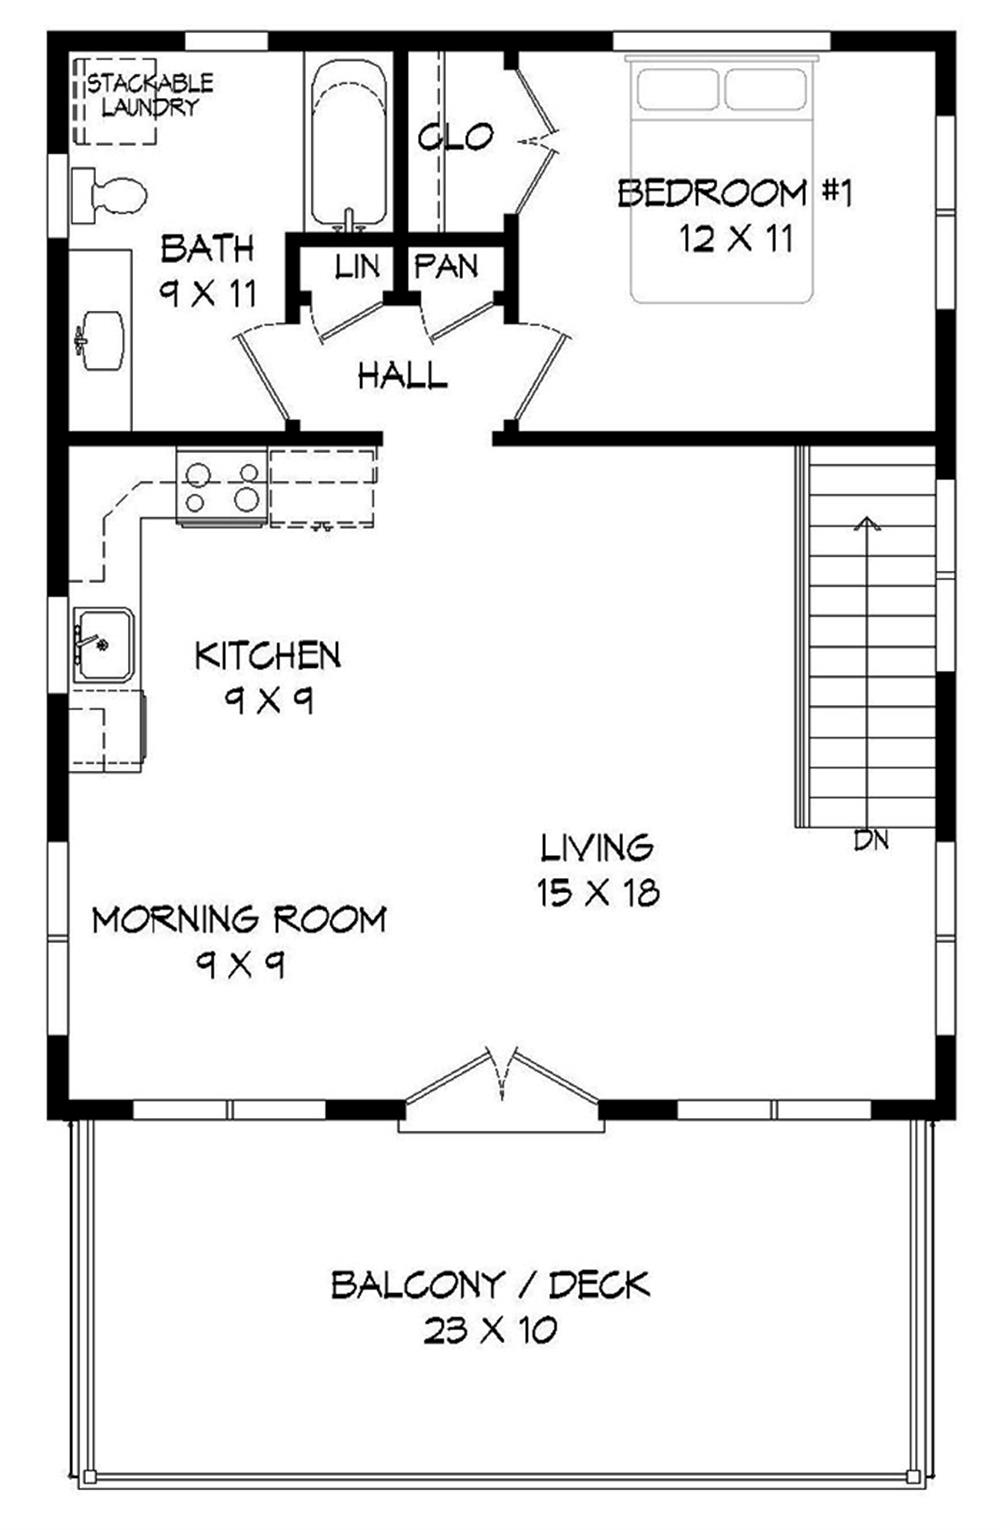 Sample home floor plan for in-law apartment above the garage.